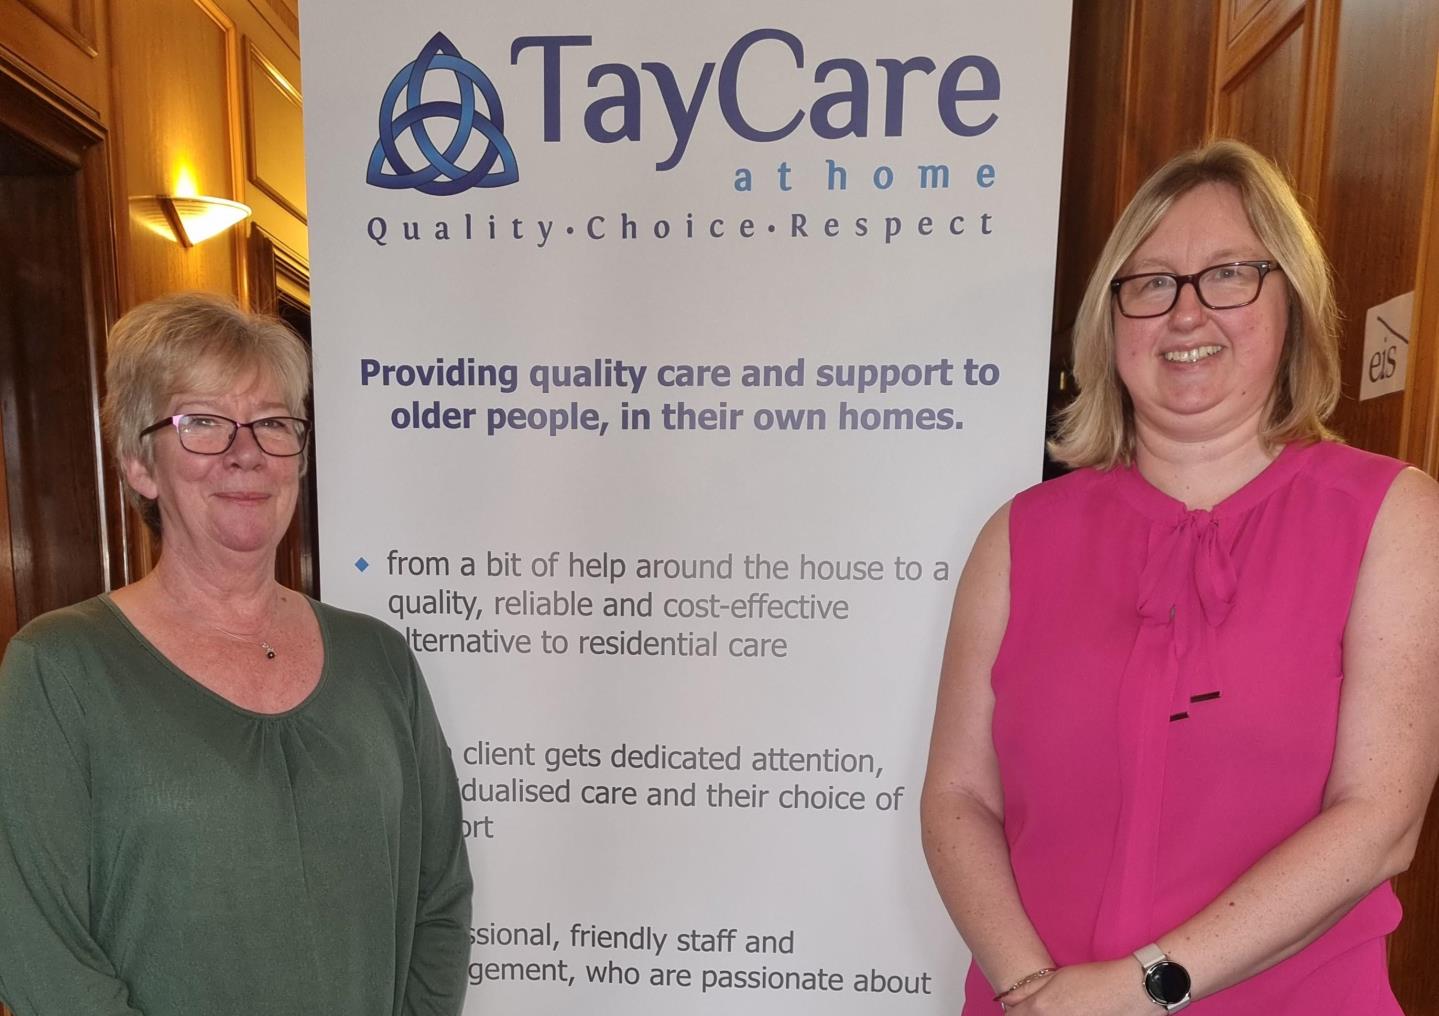 Caroline Muir, Service Manager of TayCare at Home and Jill Buchan, Director